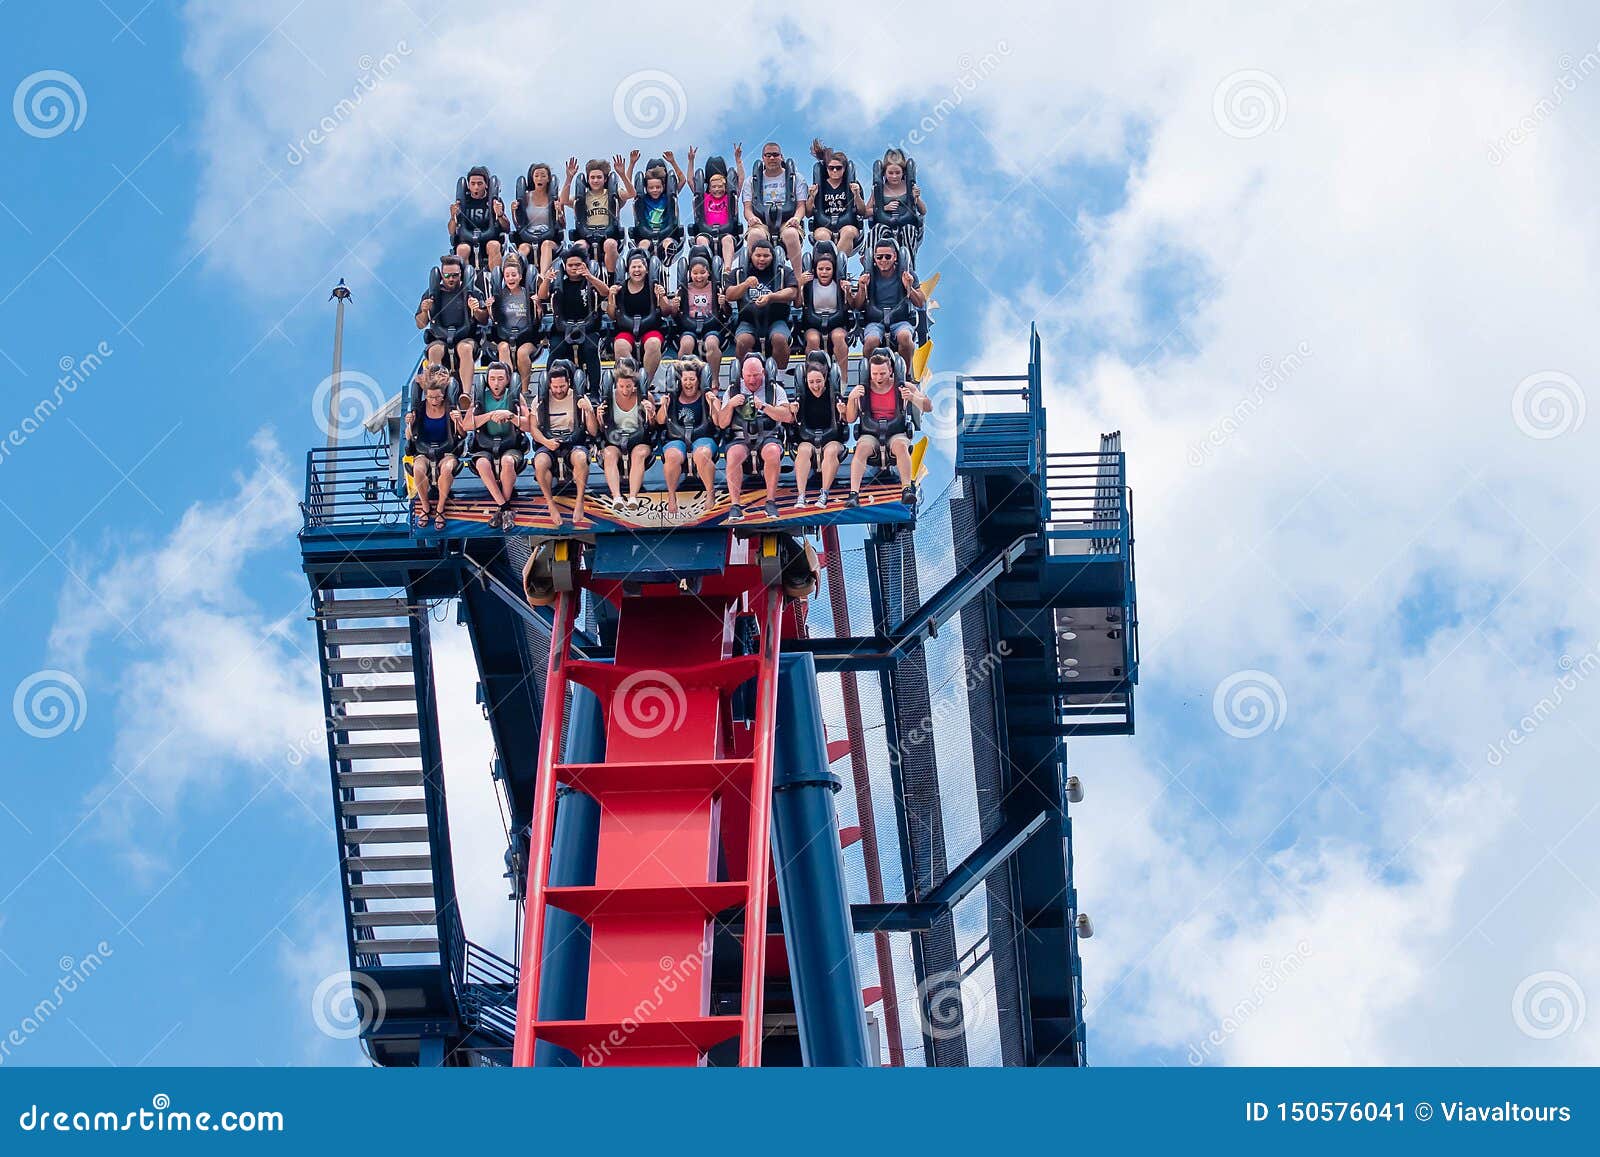 Excited Faces Of People Enyoing A Sheikra Rollercoaster Ride At